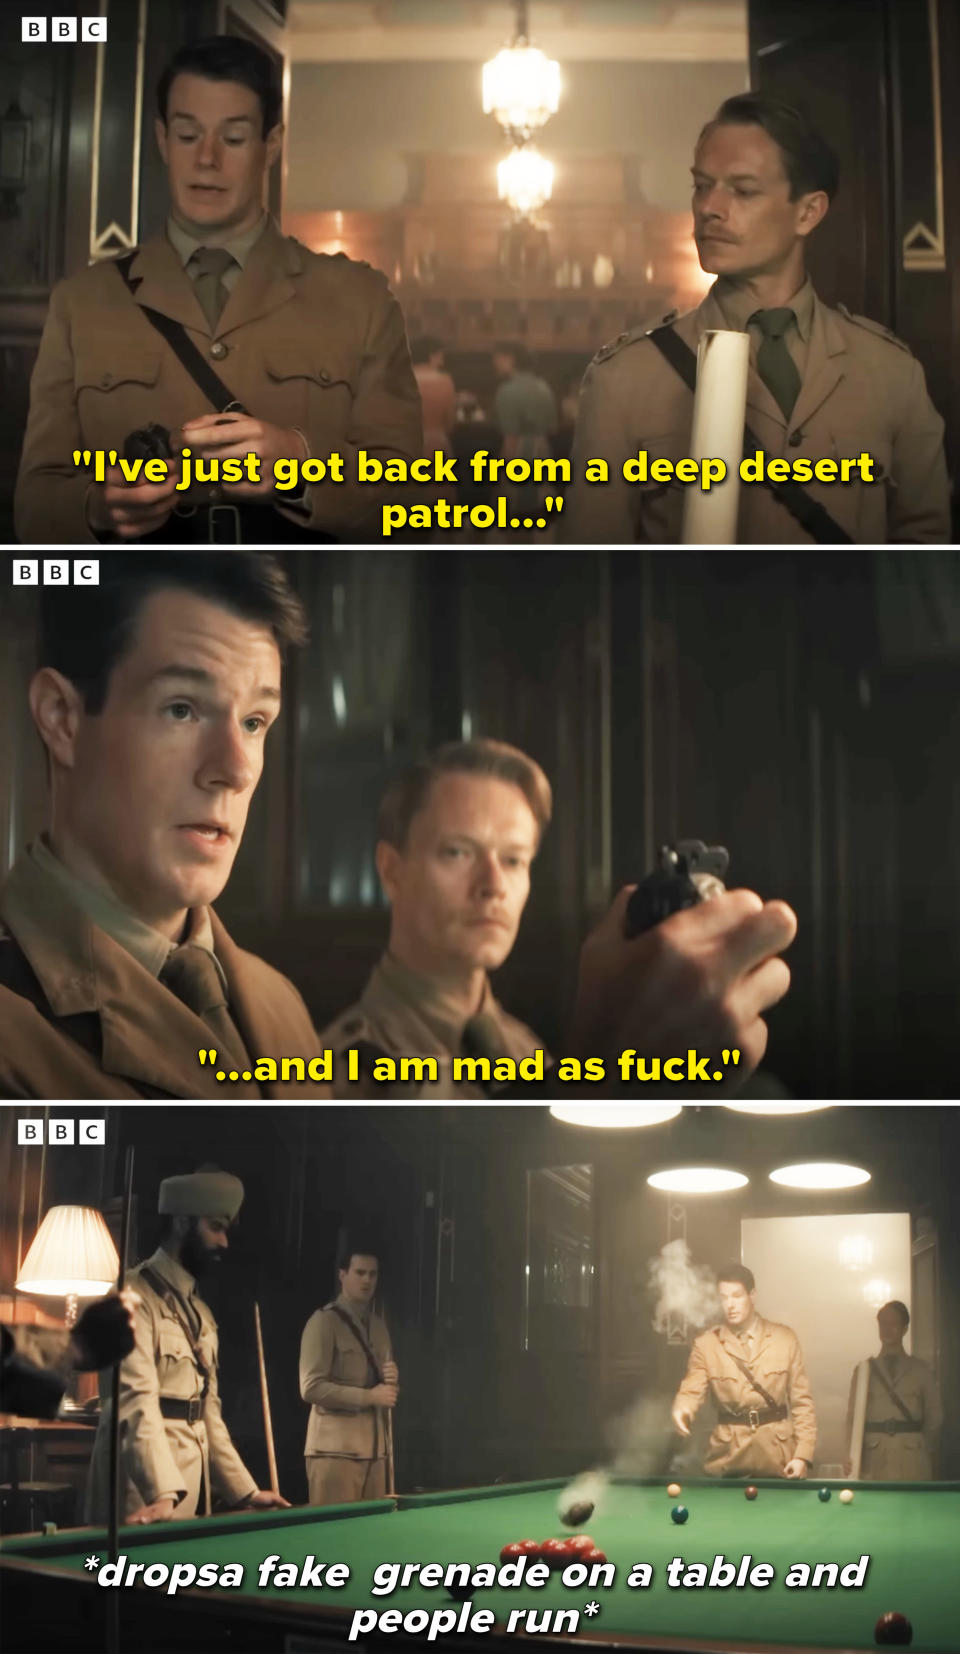 Connor's character saying he's mad as fuck before dropping a grenade on a pool table